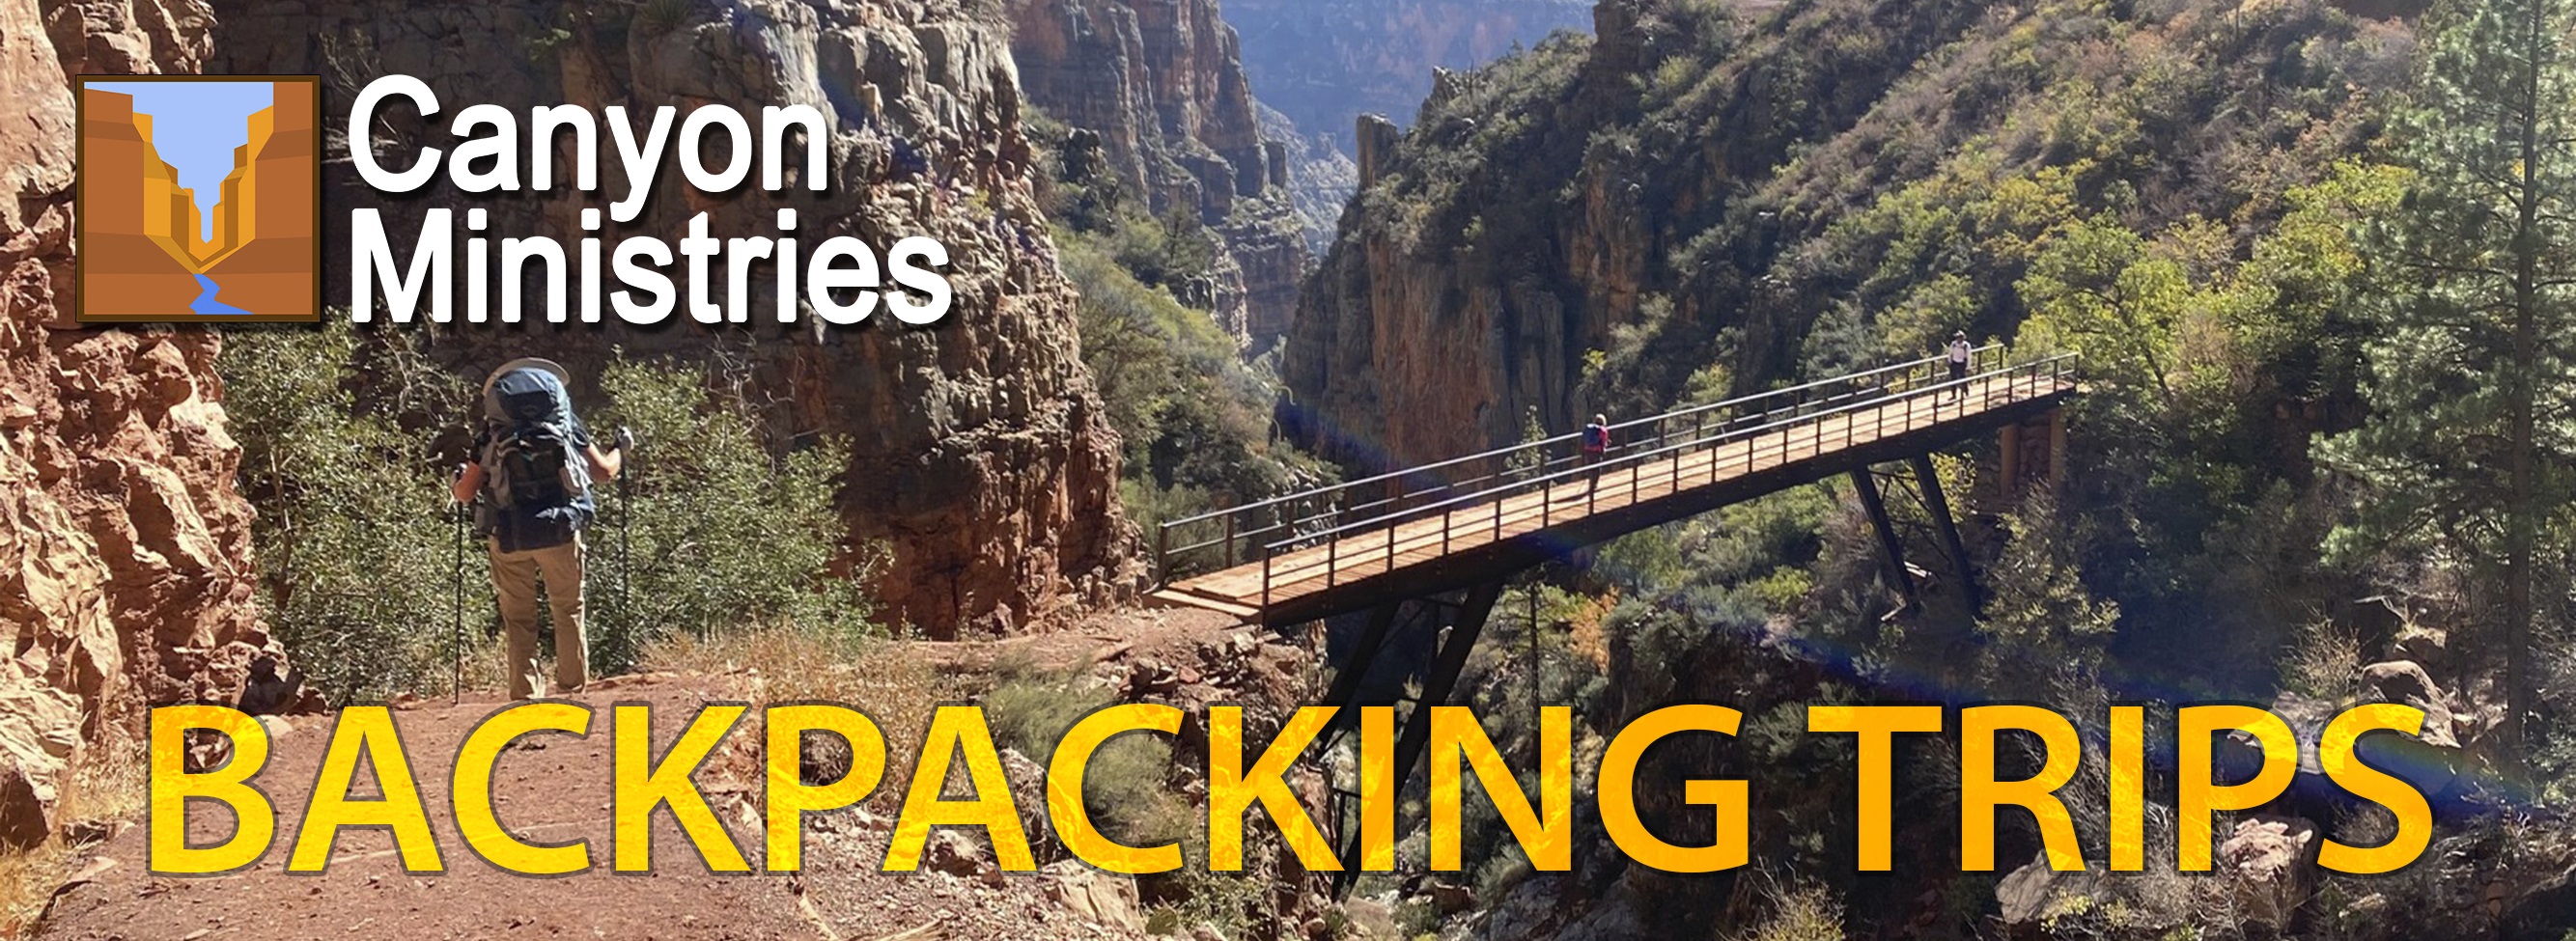 Backpacking Trips Banner